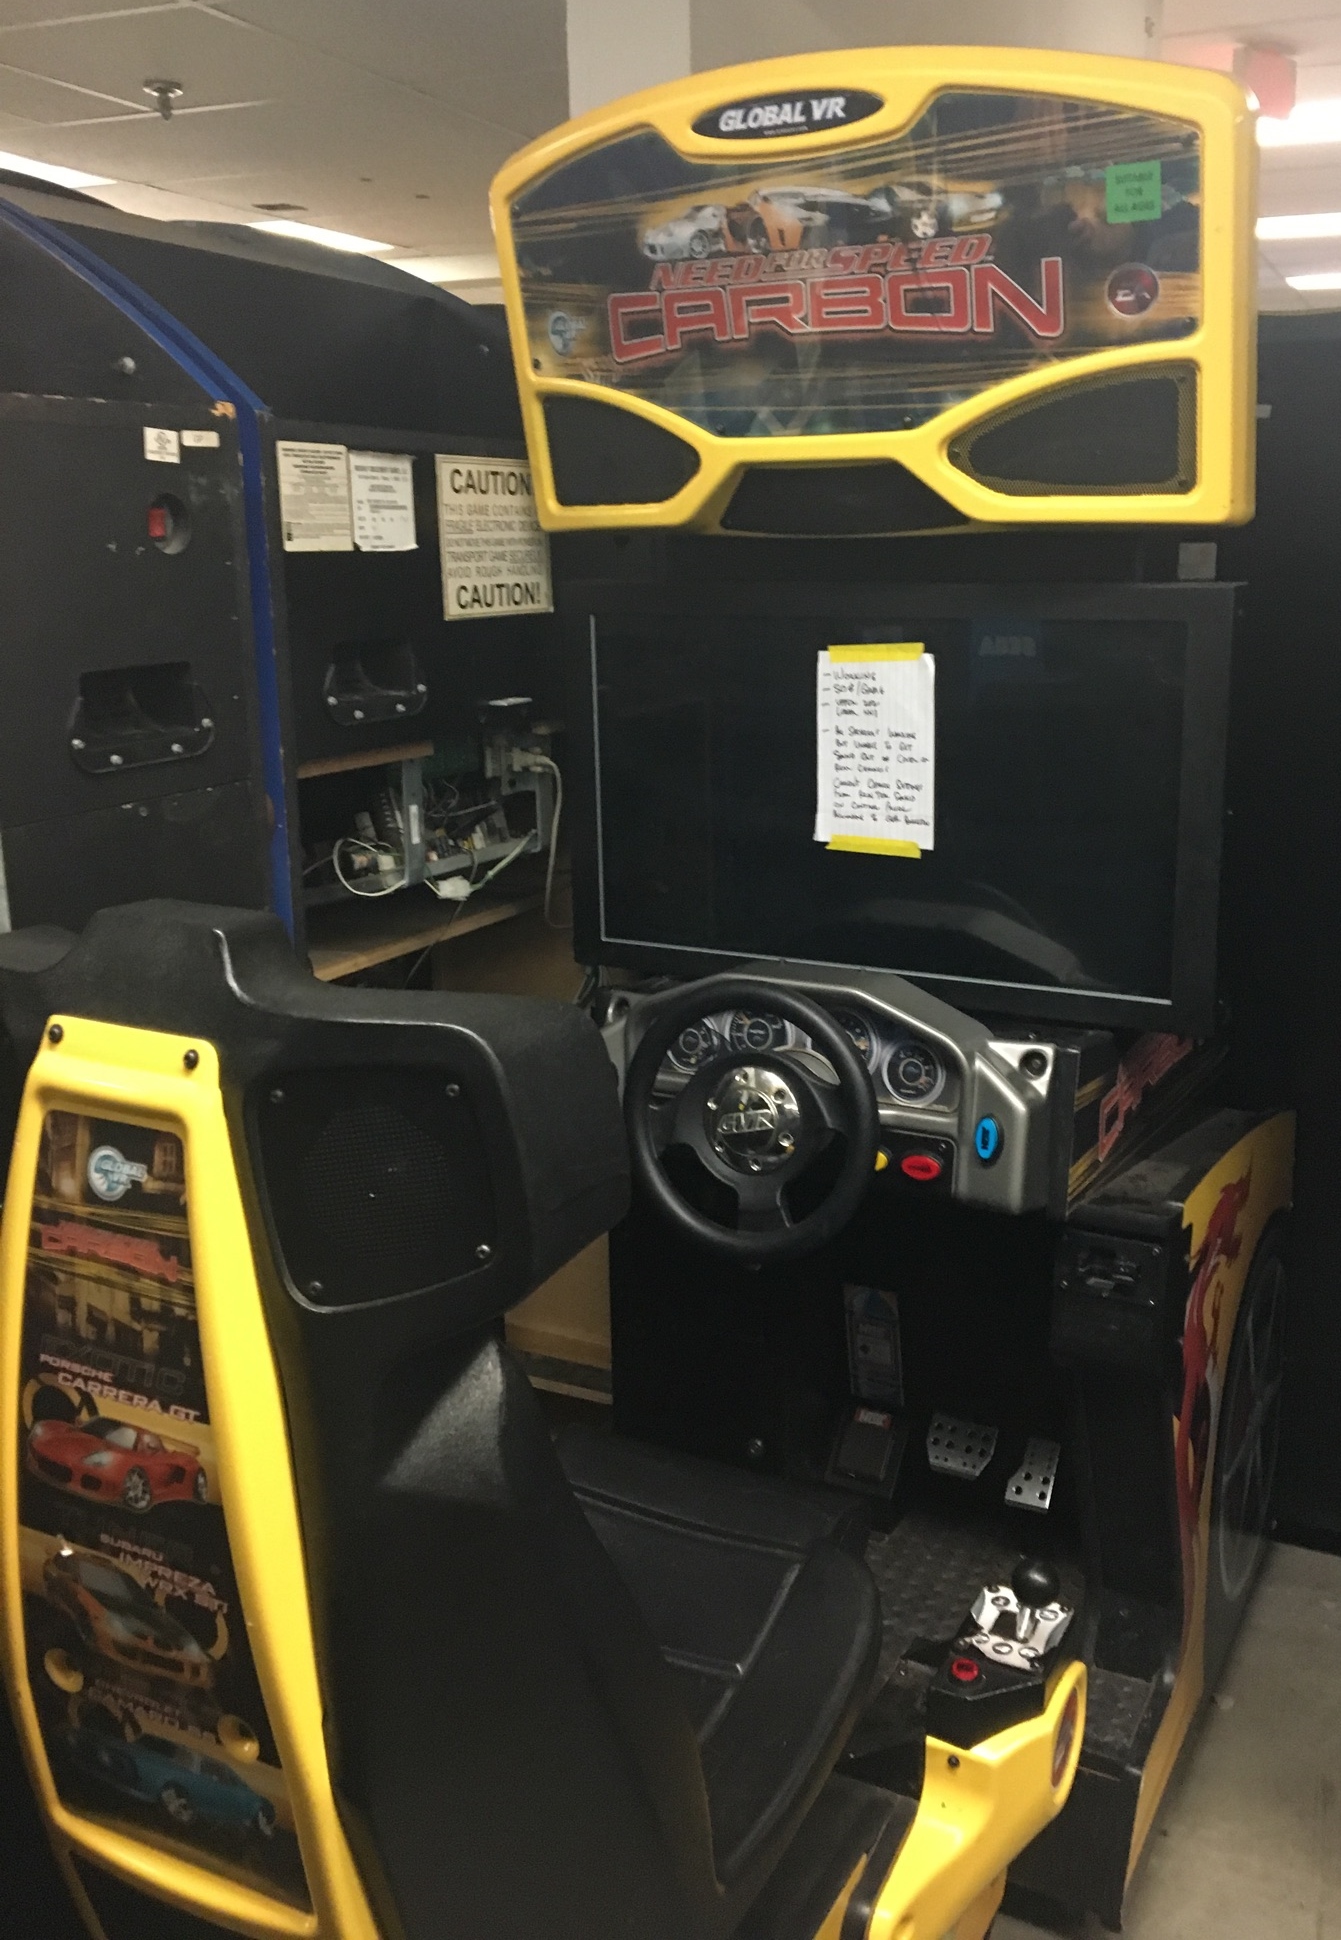 NEED FOR SPEED CARBON 32" SIT-DOWN DRIVER Arcade Machine Game for sale by GLOBAL VR! | COIN-OP PARTS ETC | Arcade | Pinball Vending